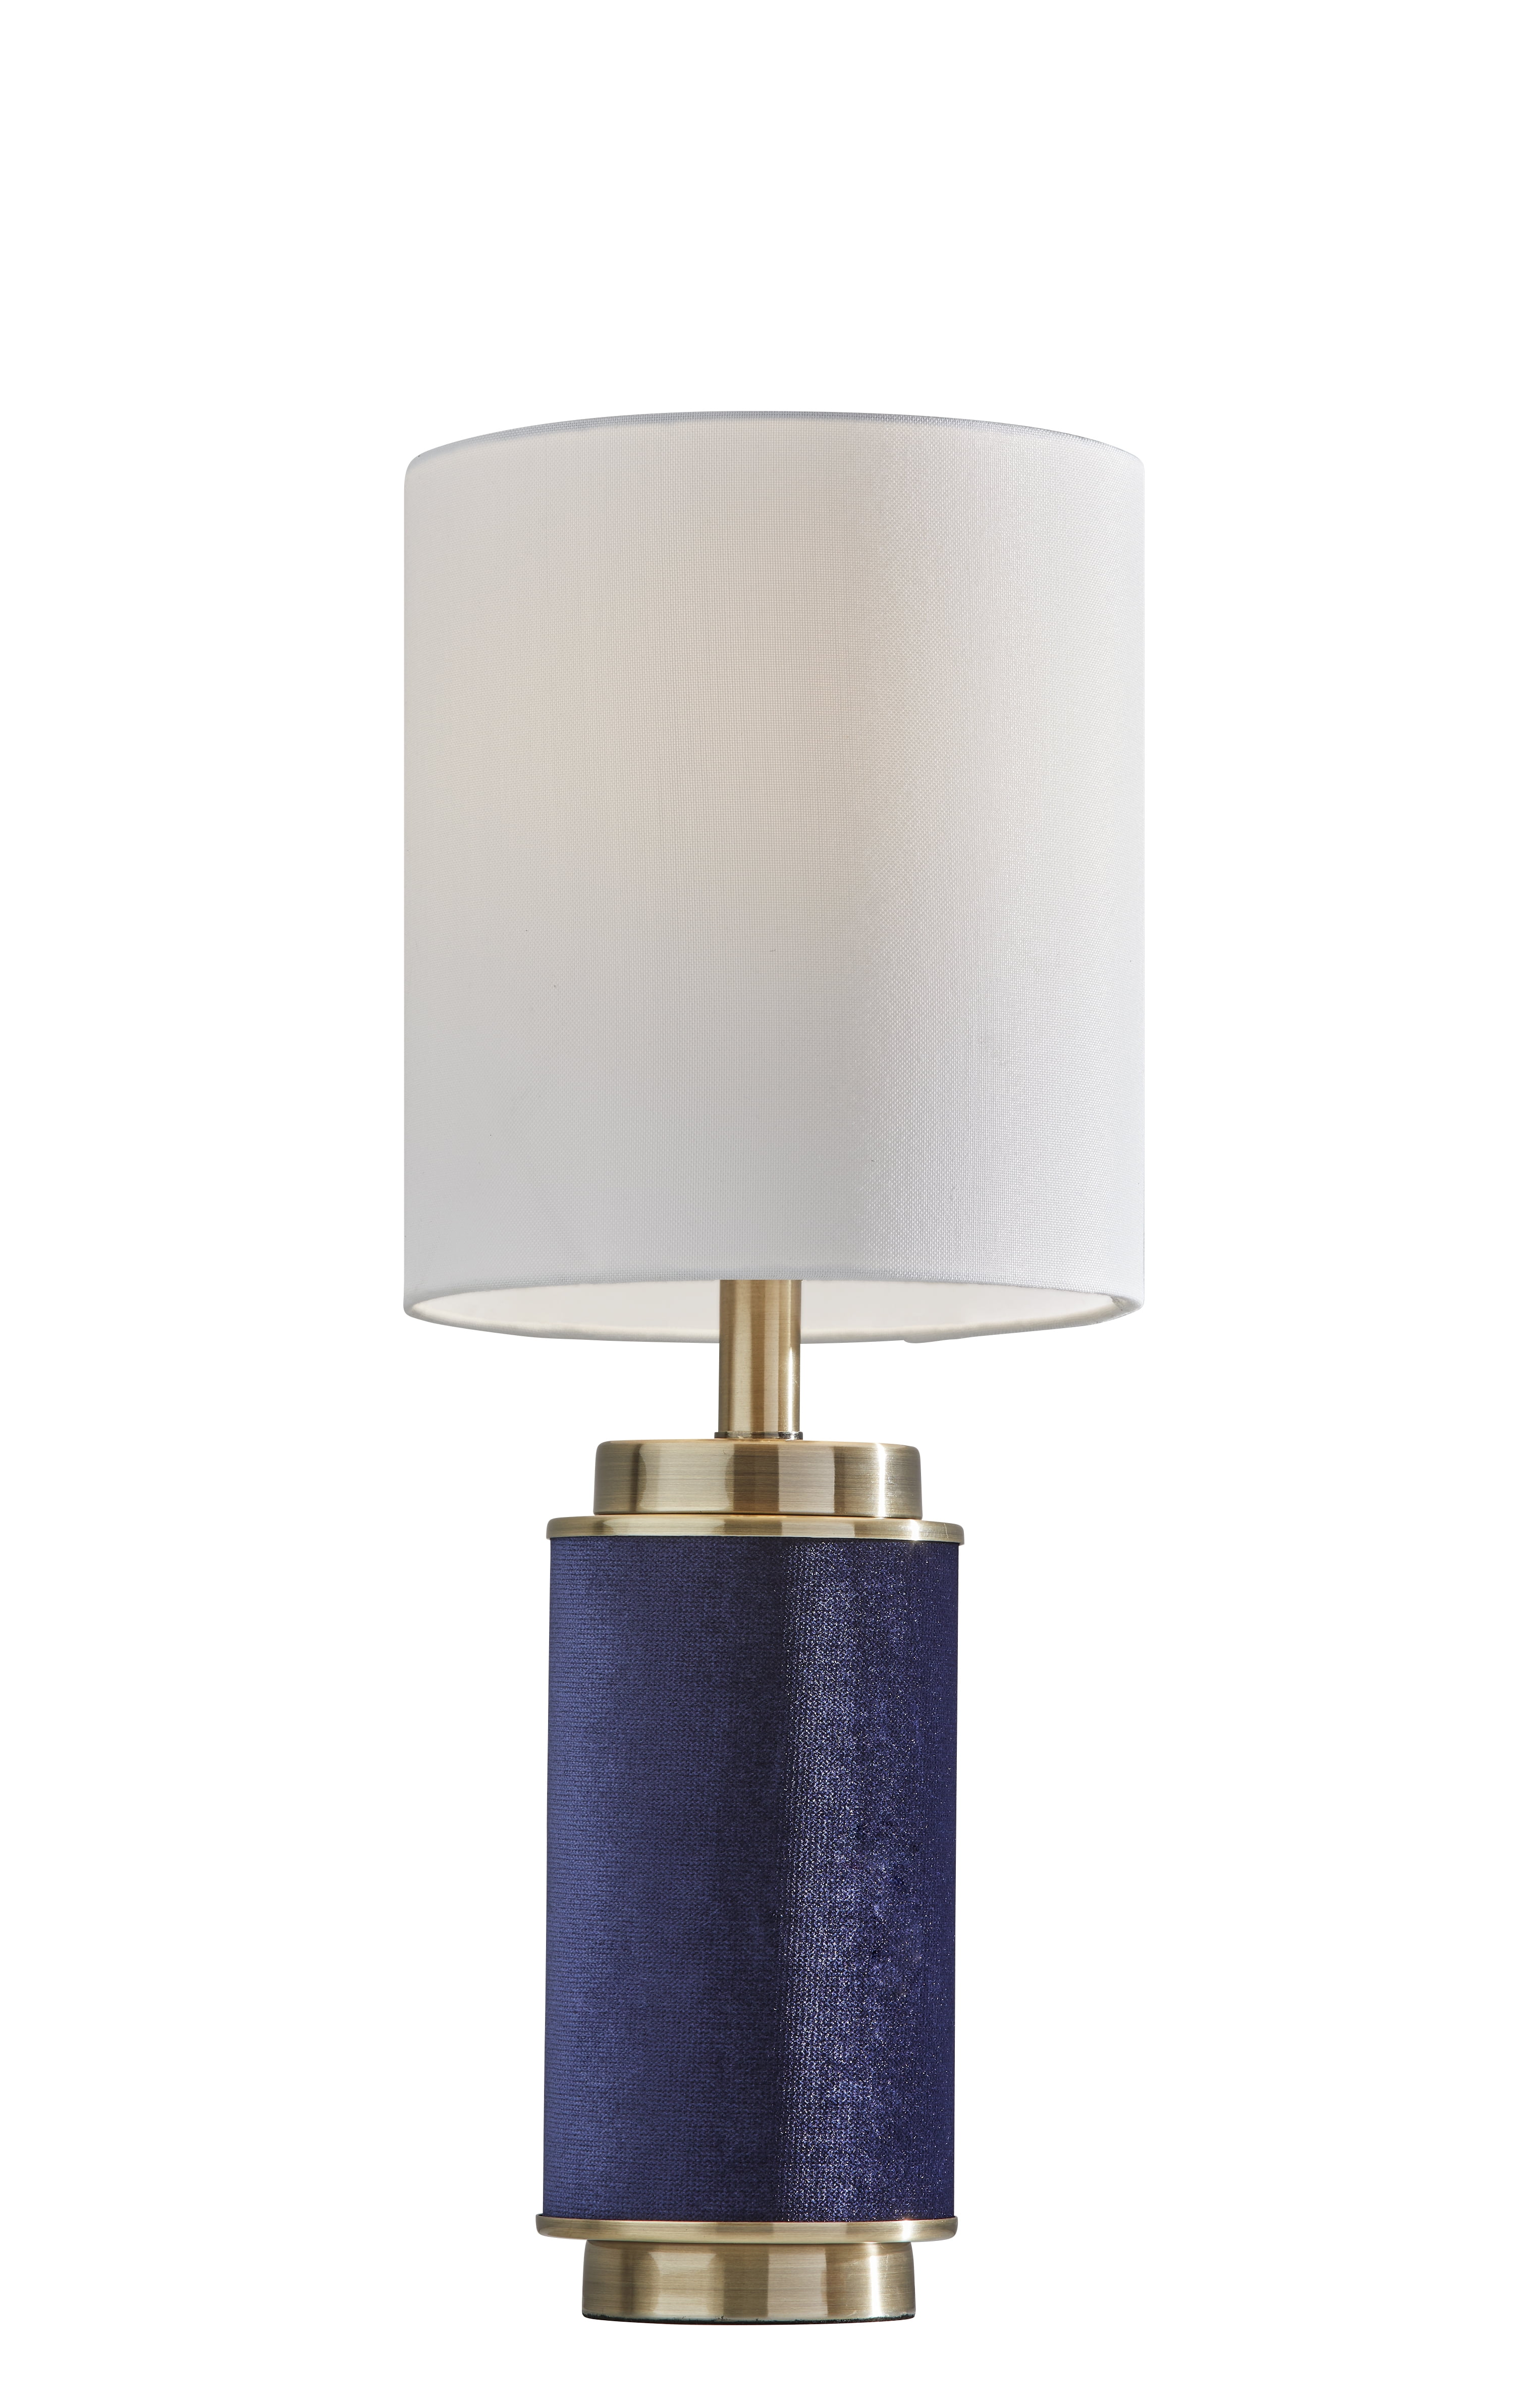 Adesso Marsha Table Lamp Antique Brass, Navy Blue And Gold Table Lamps